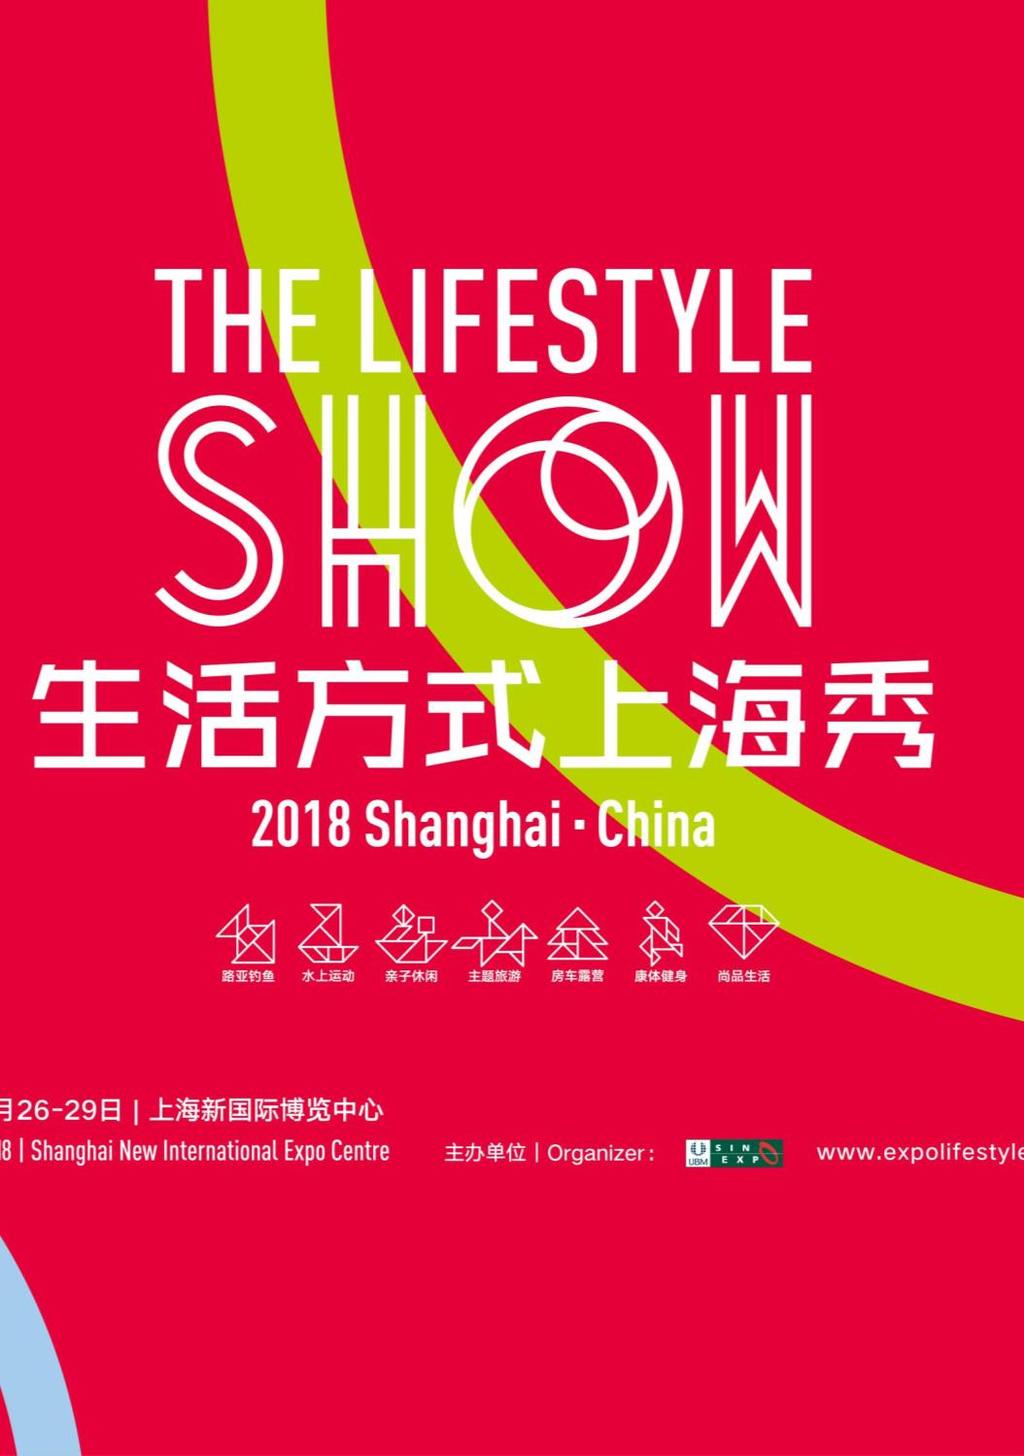 CONCURRENT SHOW: THE LIFESTYLE SHOW Over its 23-year history, CIBS has morphed from an industry boat show to one that now encompasses water leisure lifestyles and derived a B2B2C show The Lifestyle